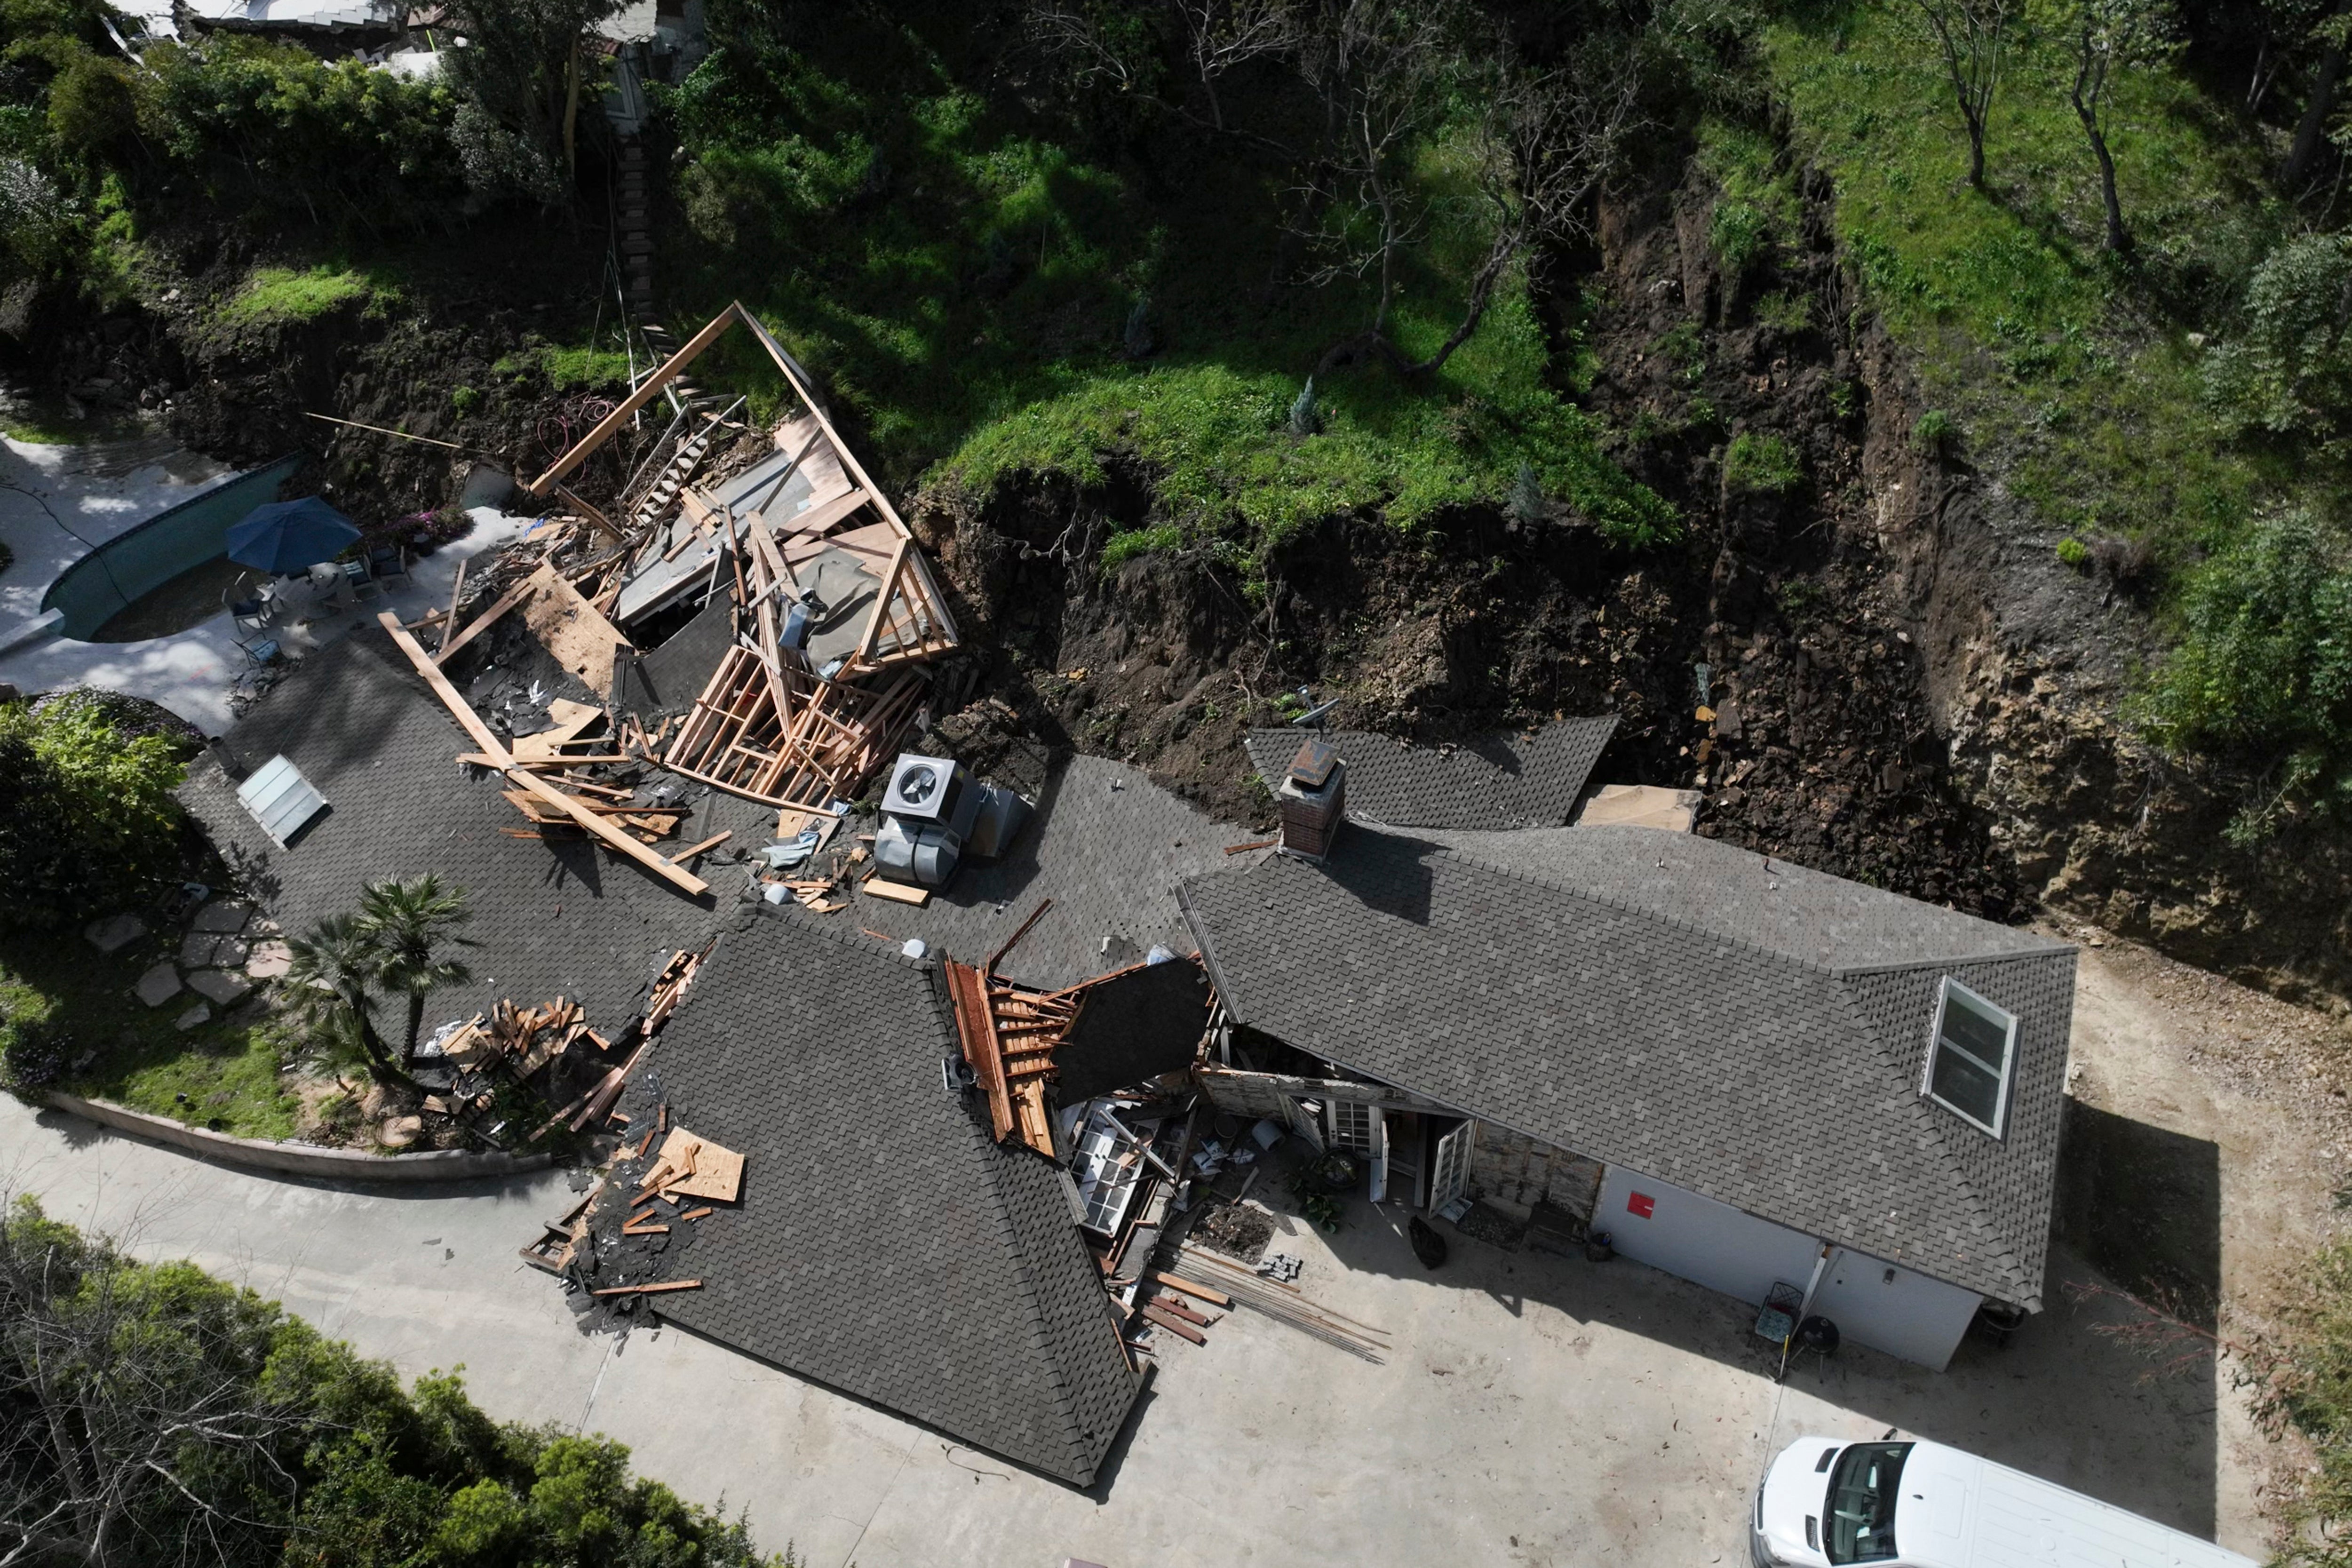 The landslide in Sherman Oaks occurred on Wednesday